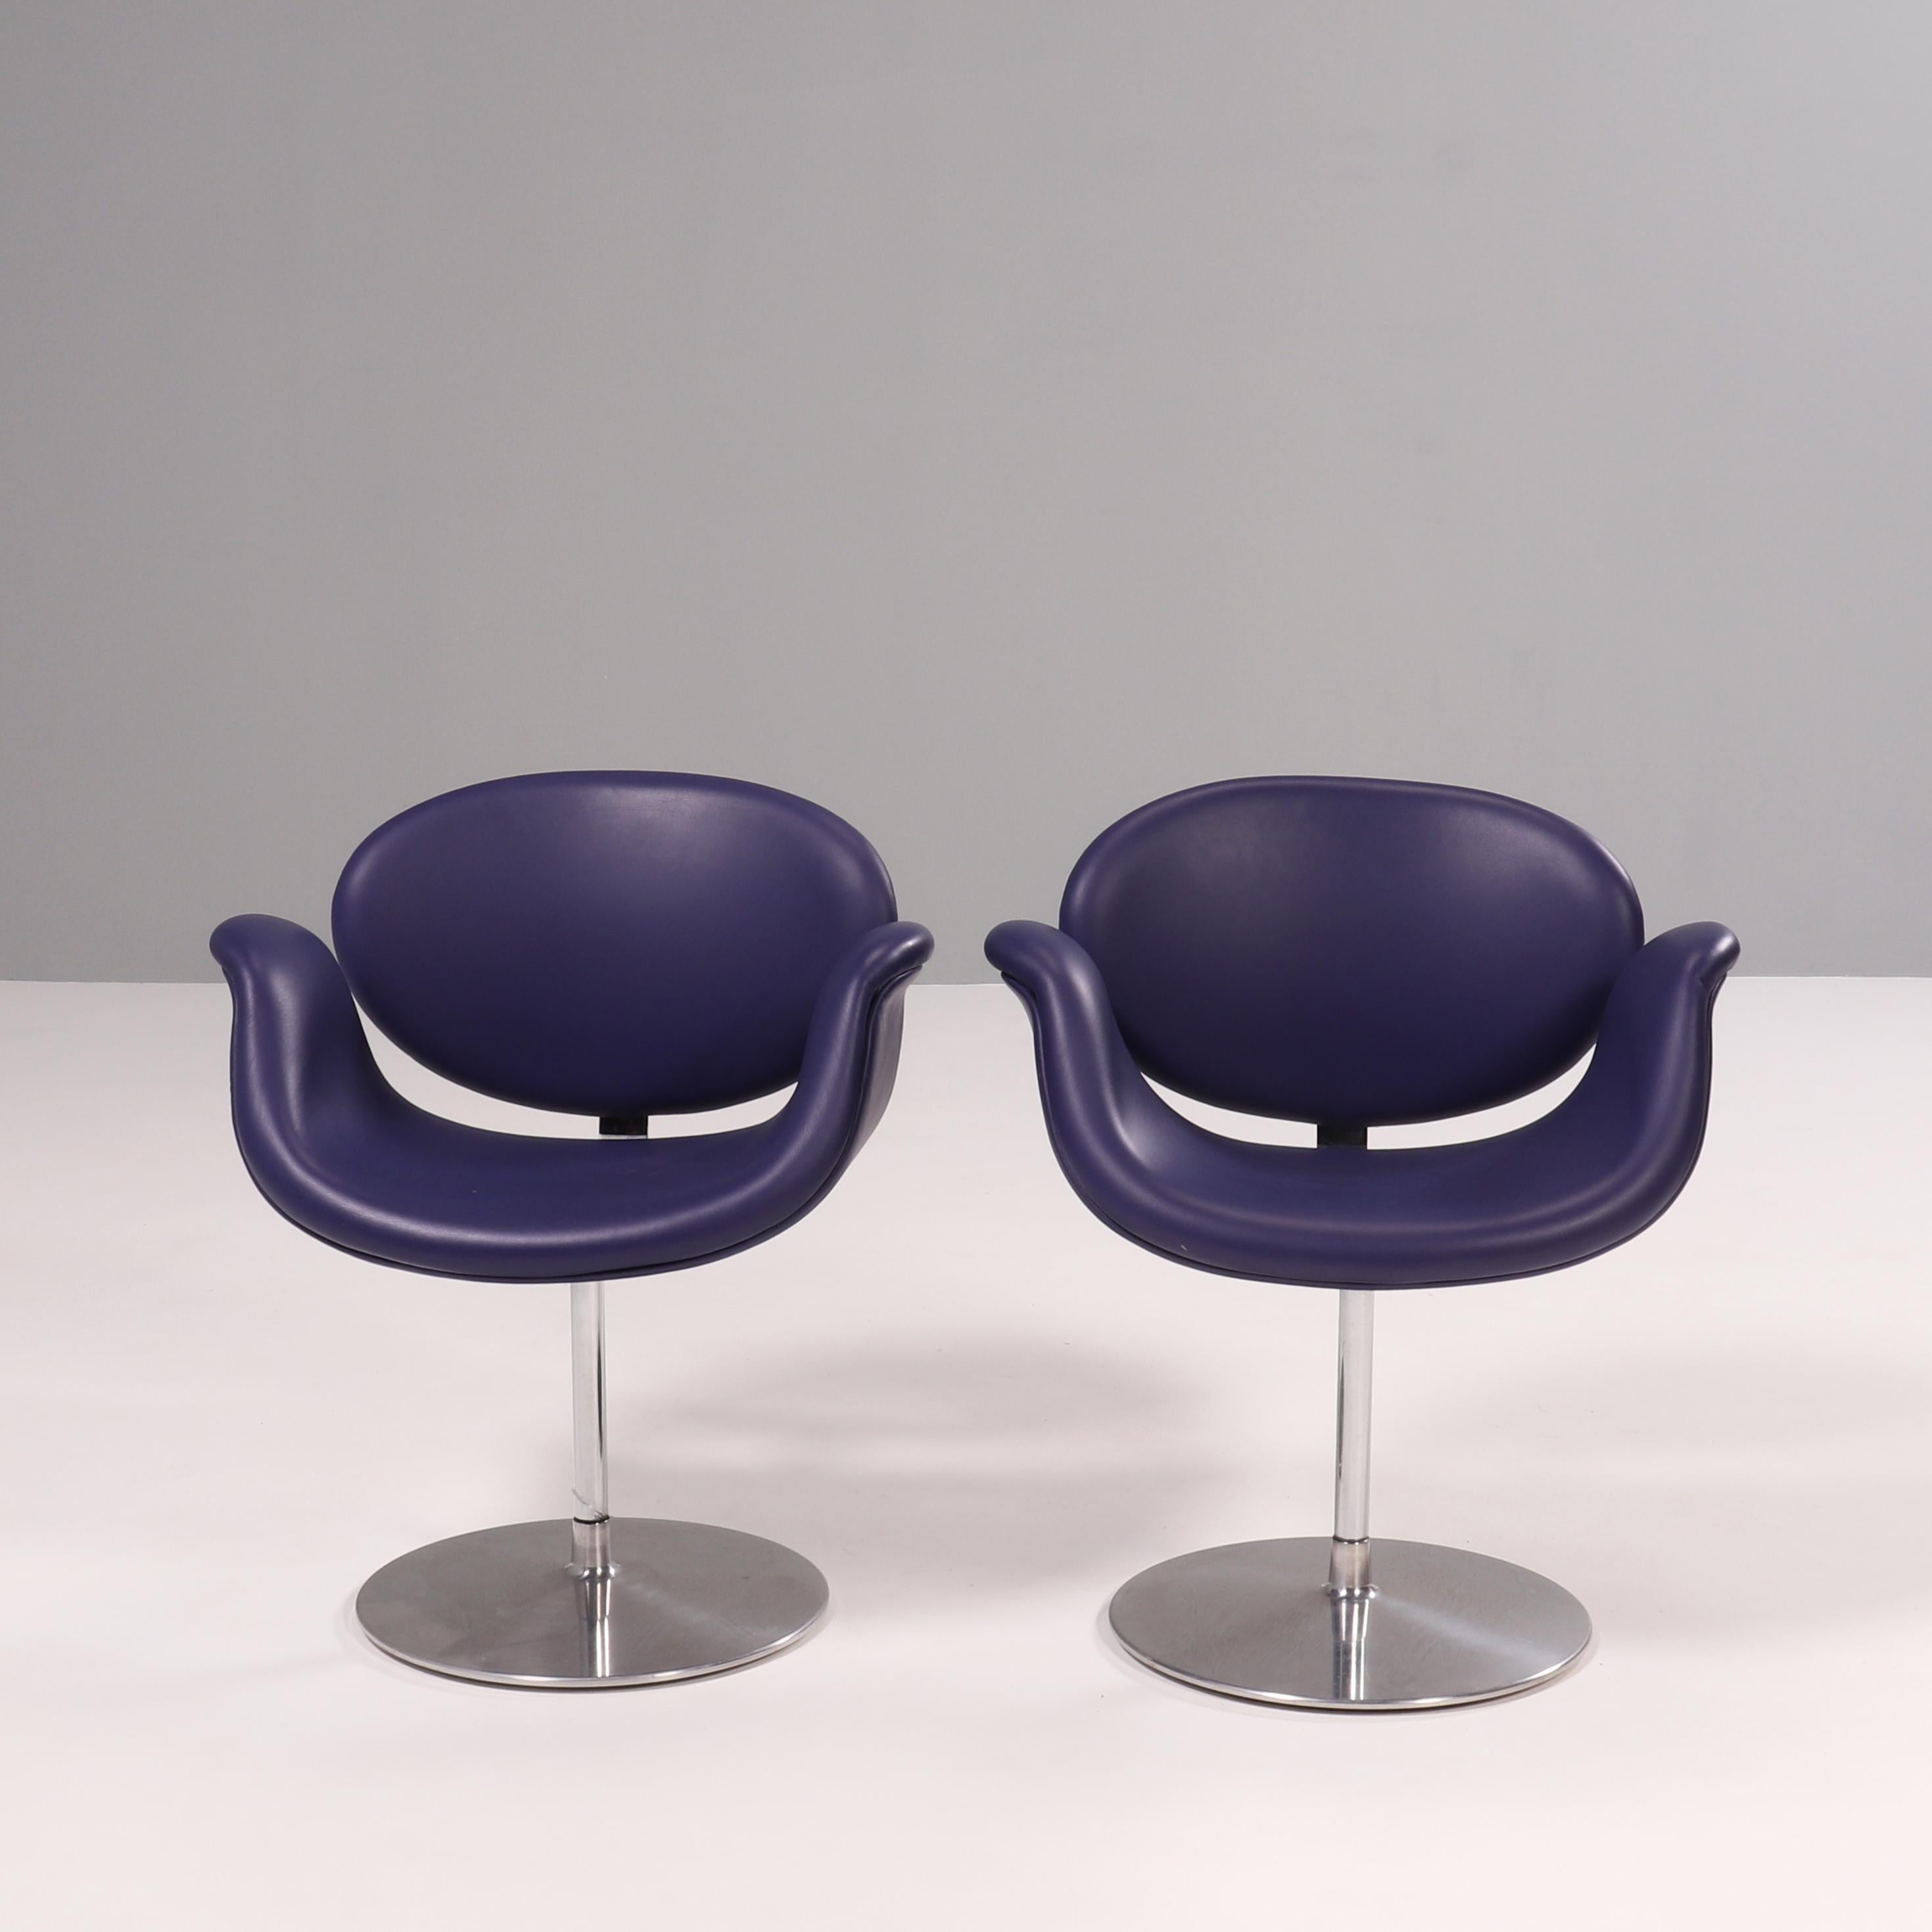 Originally designed by Pierre Paulin in 1965, the Little Tulip Chair is a design icon.

Inspired by the flower, the chair has a Tulip-esque silhouette with a petal shaped seat which curves to create armrests.

Upholstered in purple leather, the